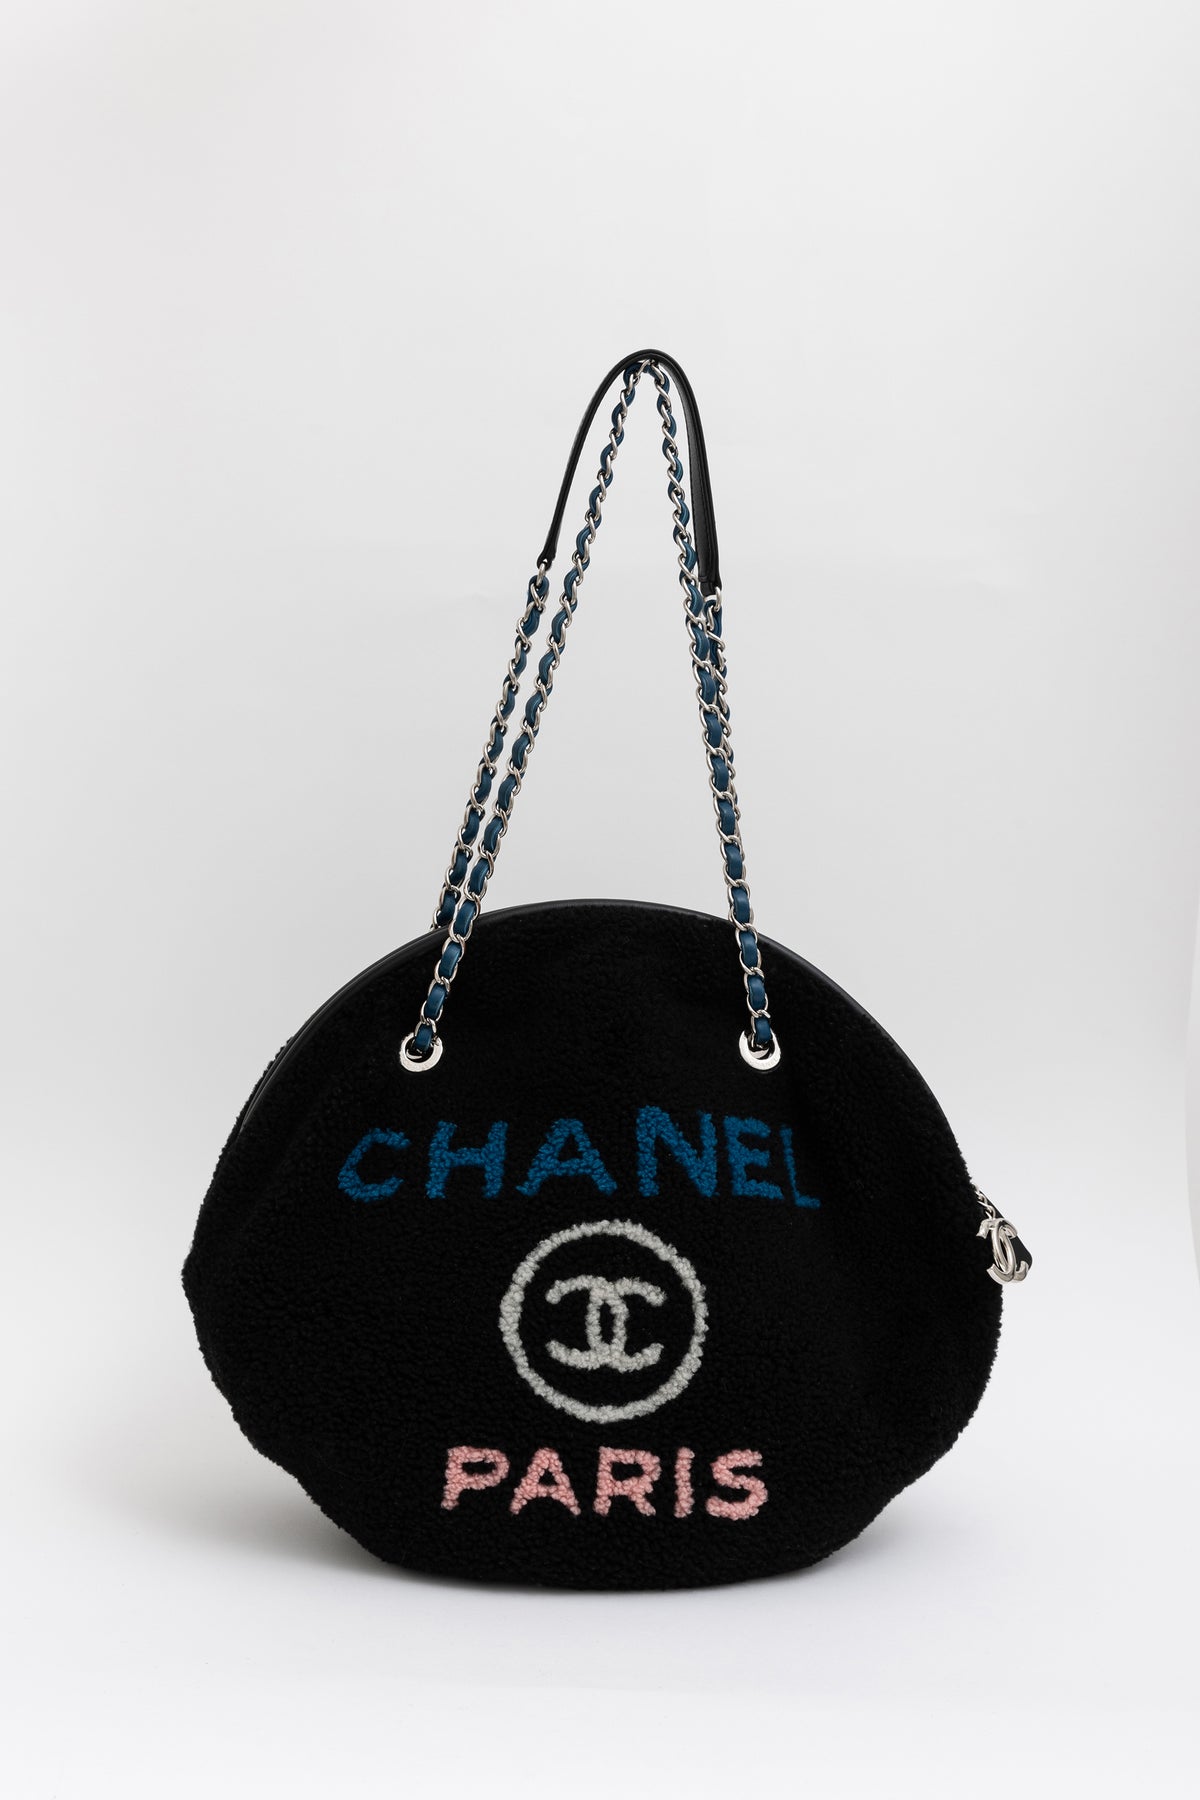 Chanel Suede Quilted Bag – The Closet Trading Company